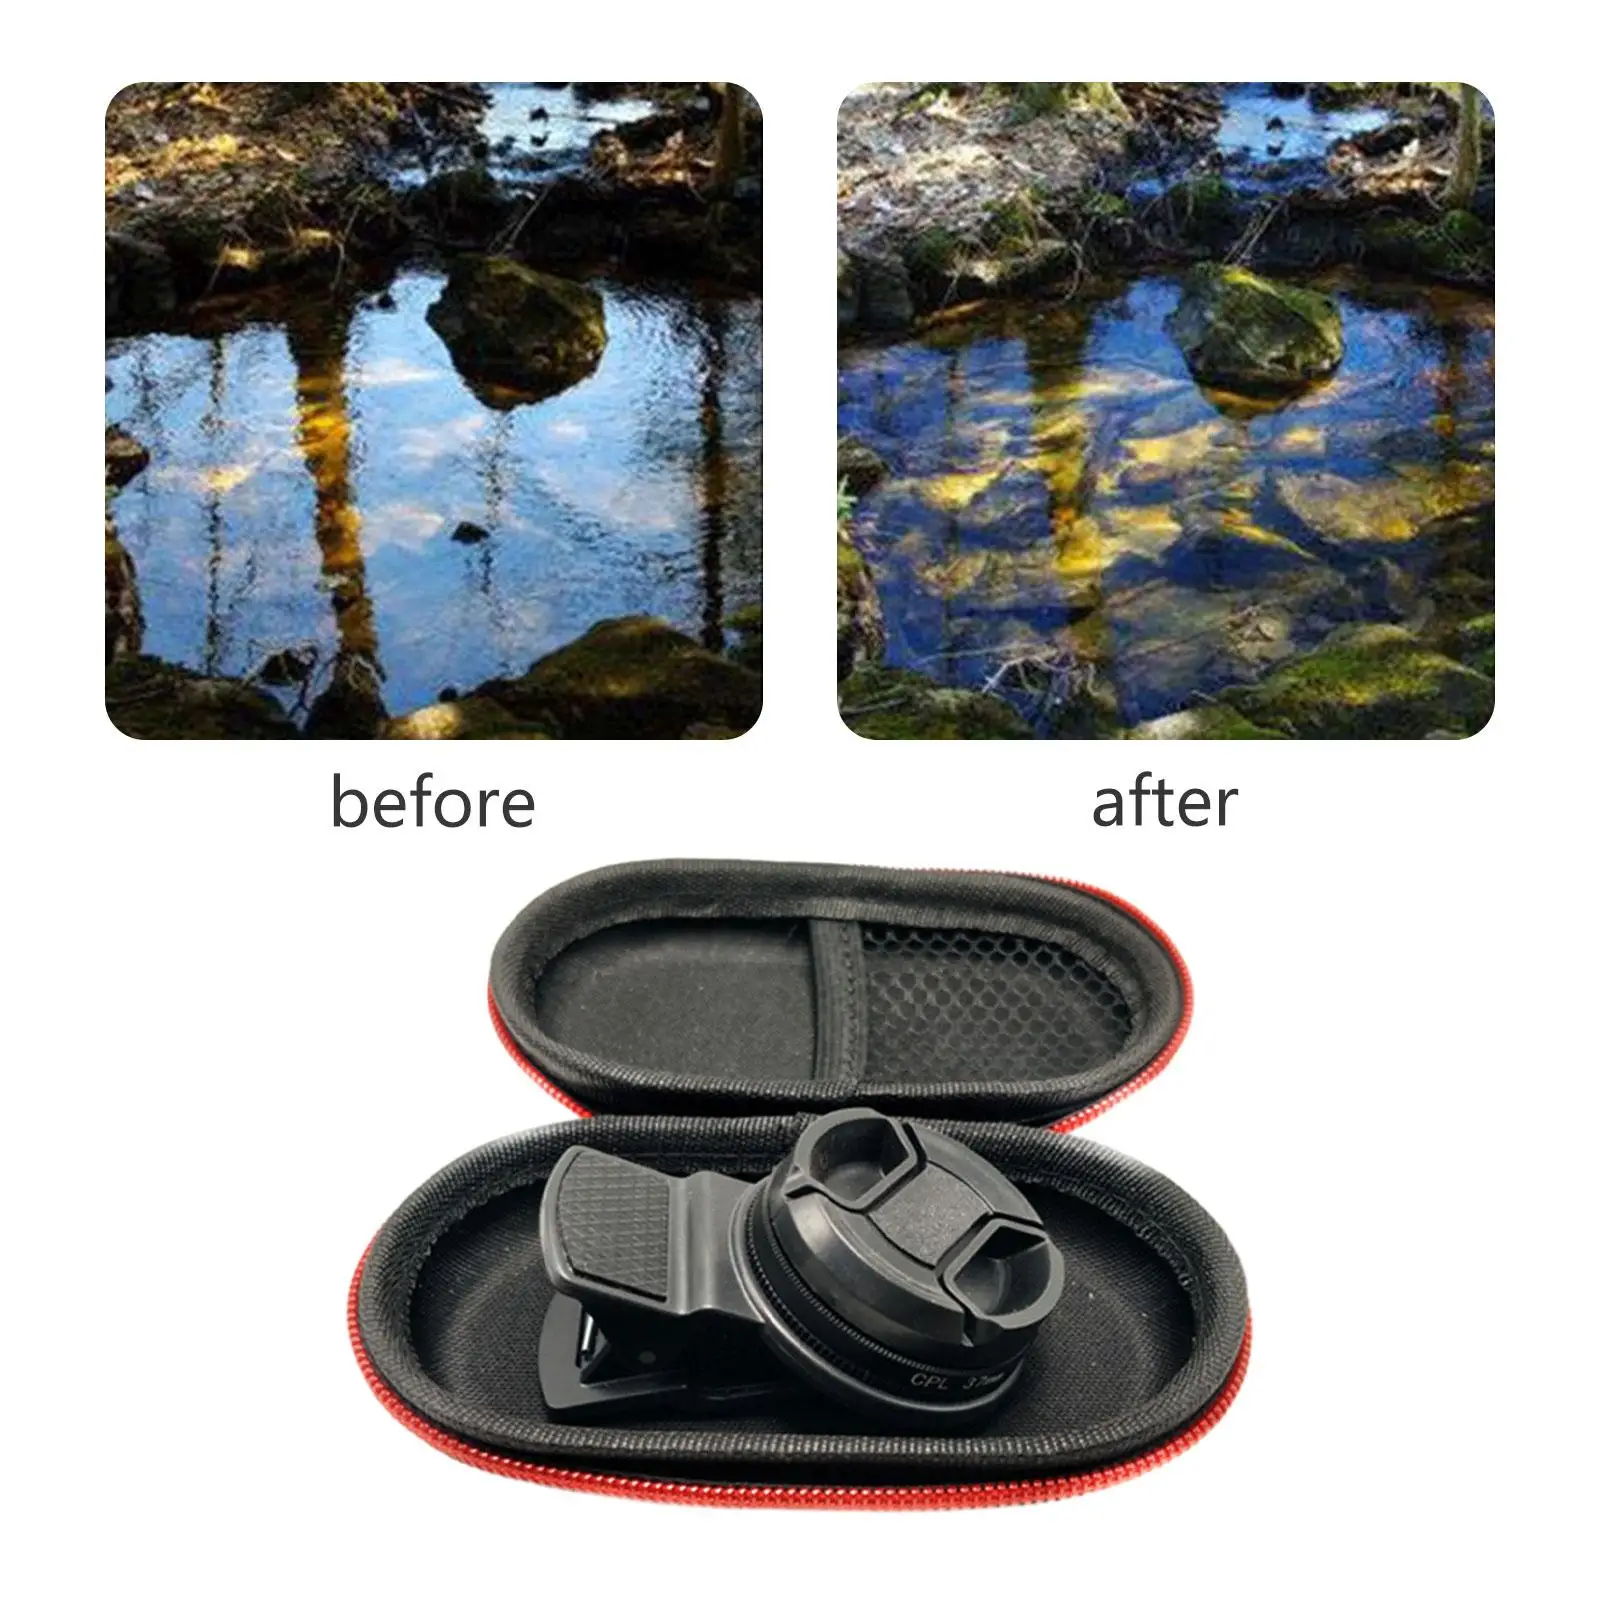 37mm CPL Phone Camera Lens Professional Accessories Polarized Phone Camera Lens Circular Polarizer Lens Filter with Carrying Bag